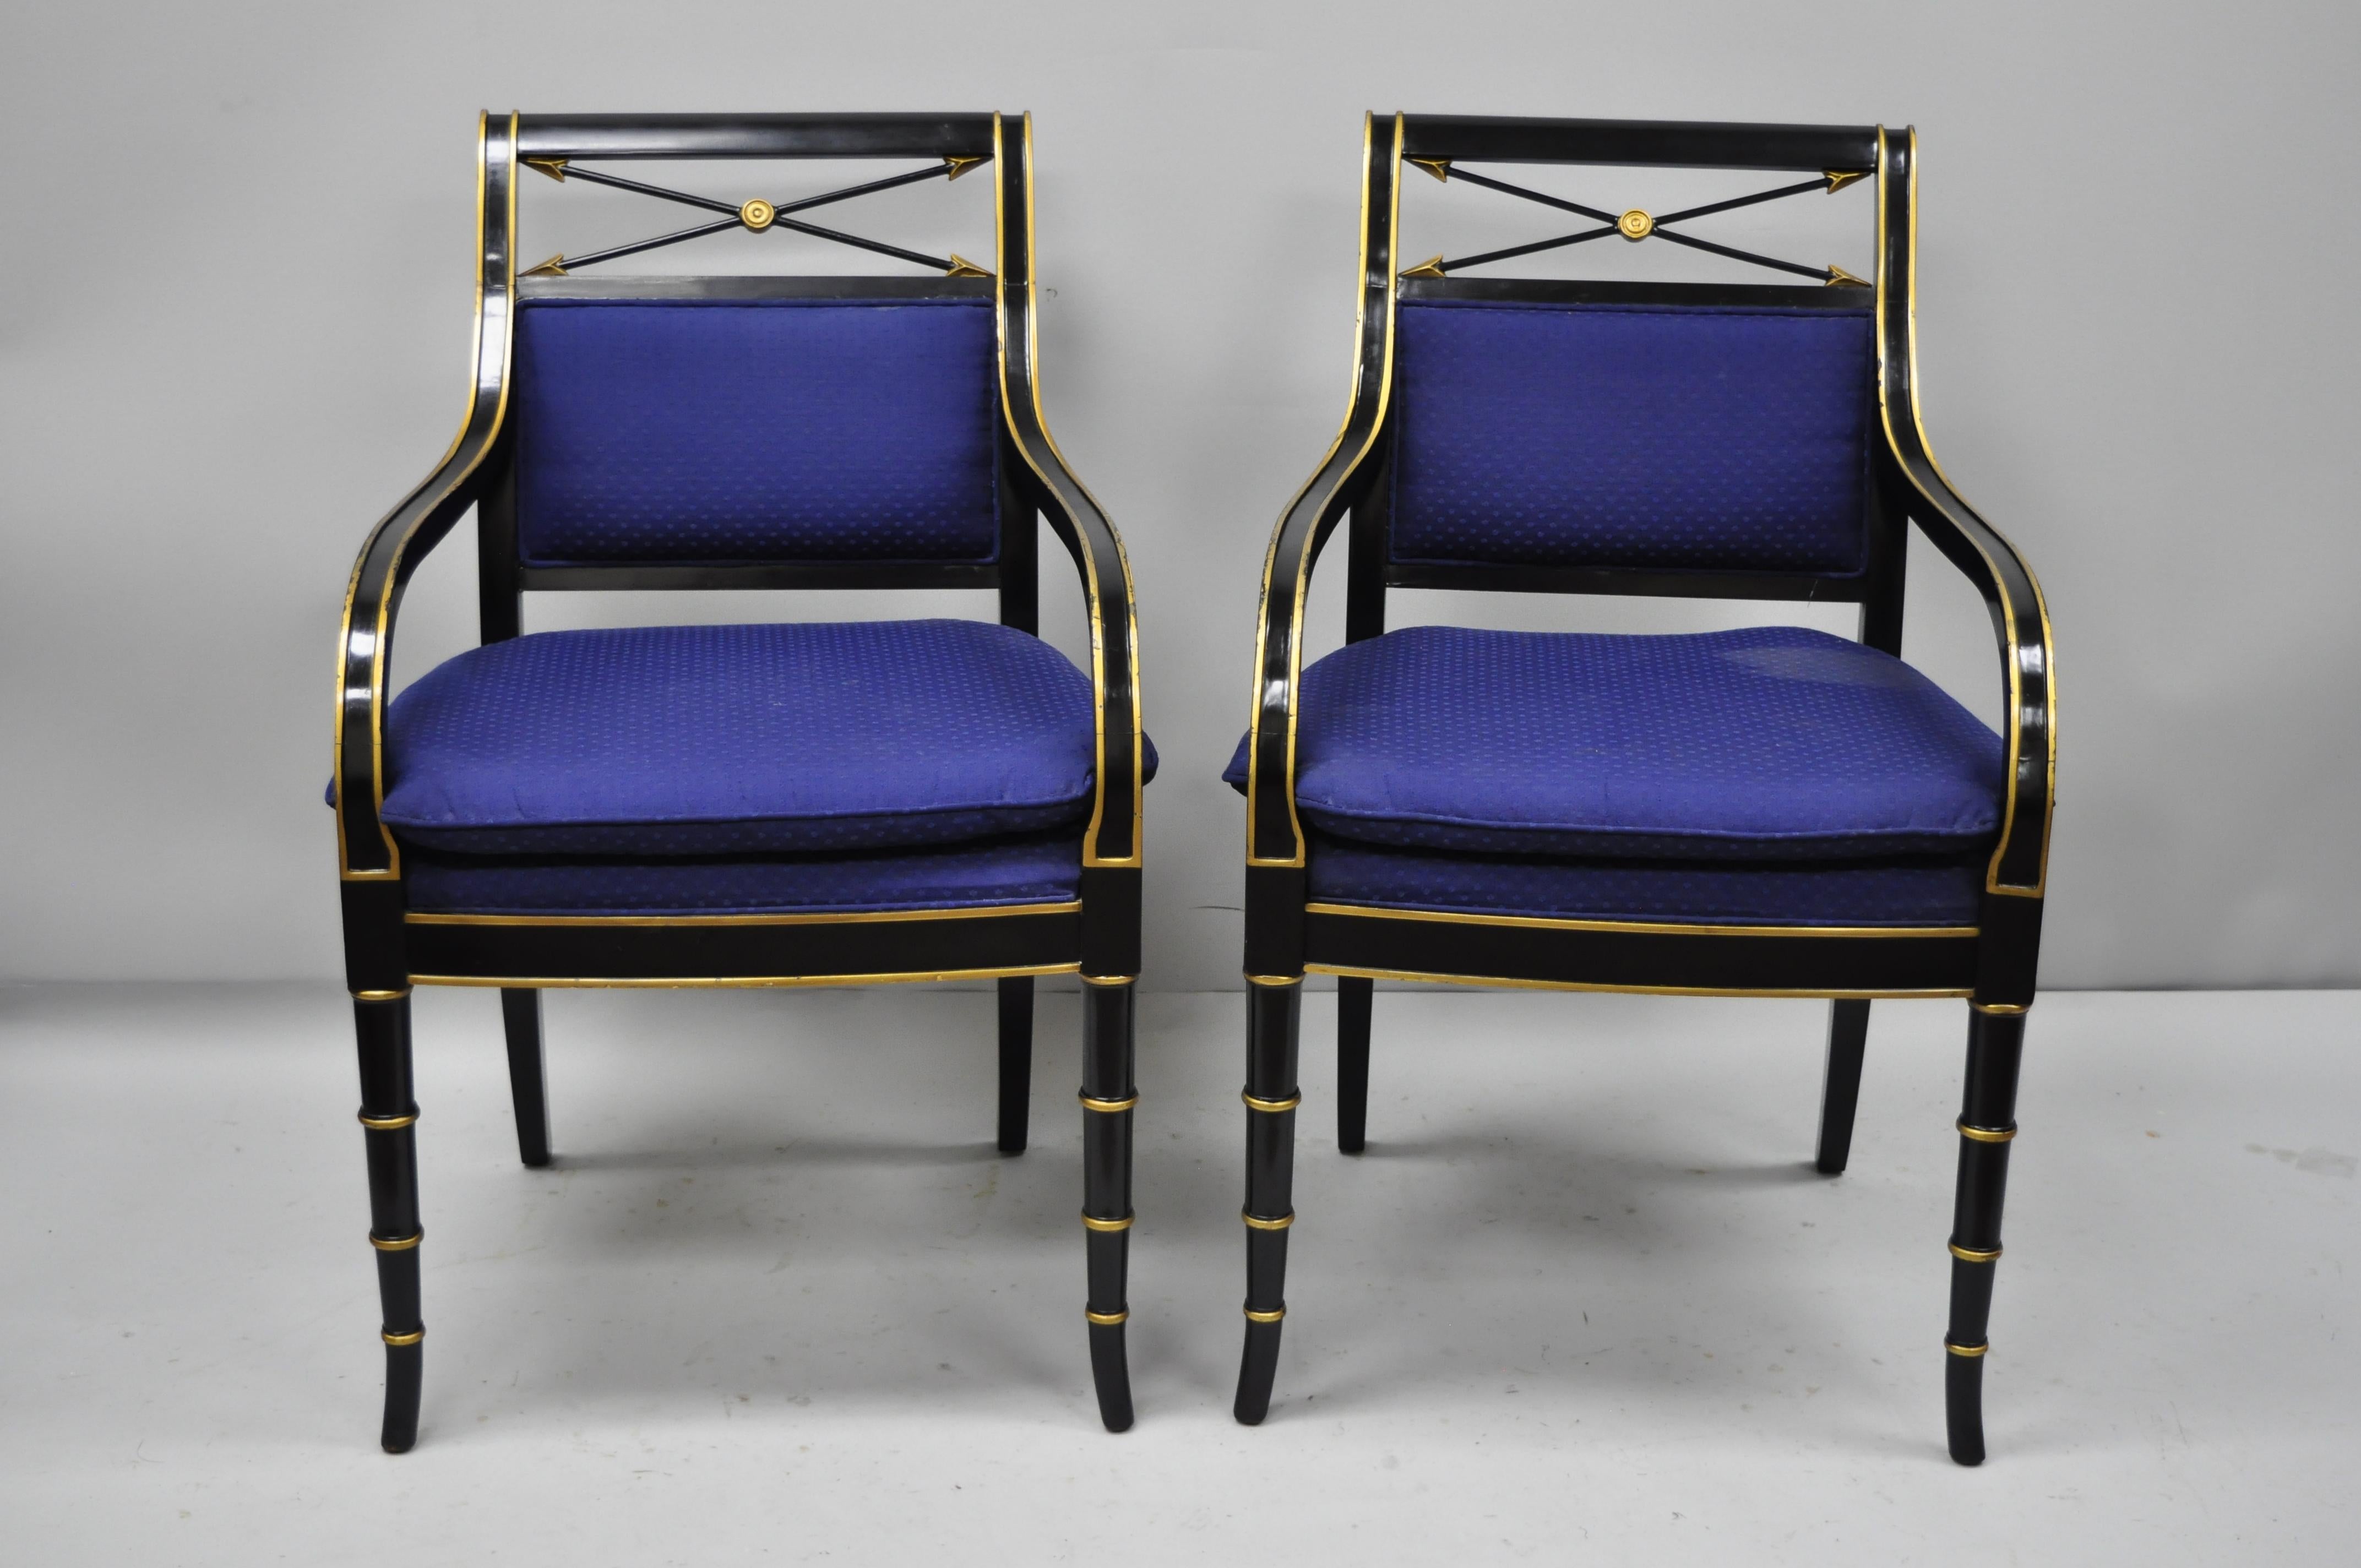 Pair of black and gold English Regency style arrow back armchairs neoclassical chair. Items feature black lacquer and gold gilt finish, cross arrow backs, faux bamboo form legs, upholstered. Solid wood frame, serial number (see image number 9),